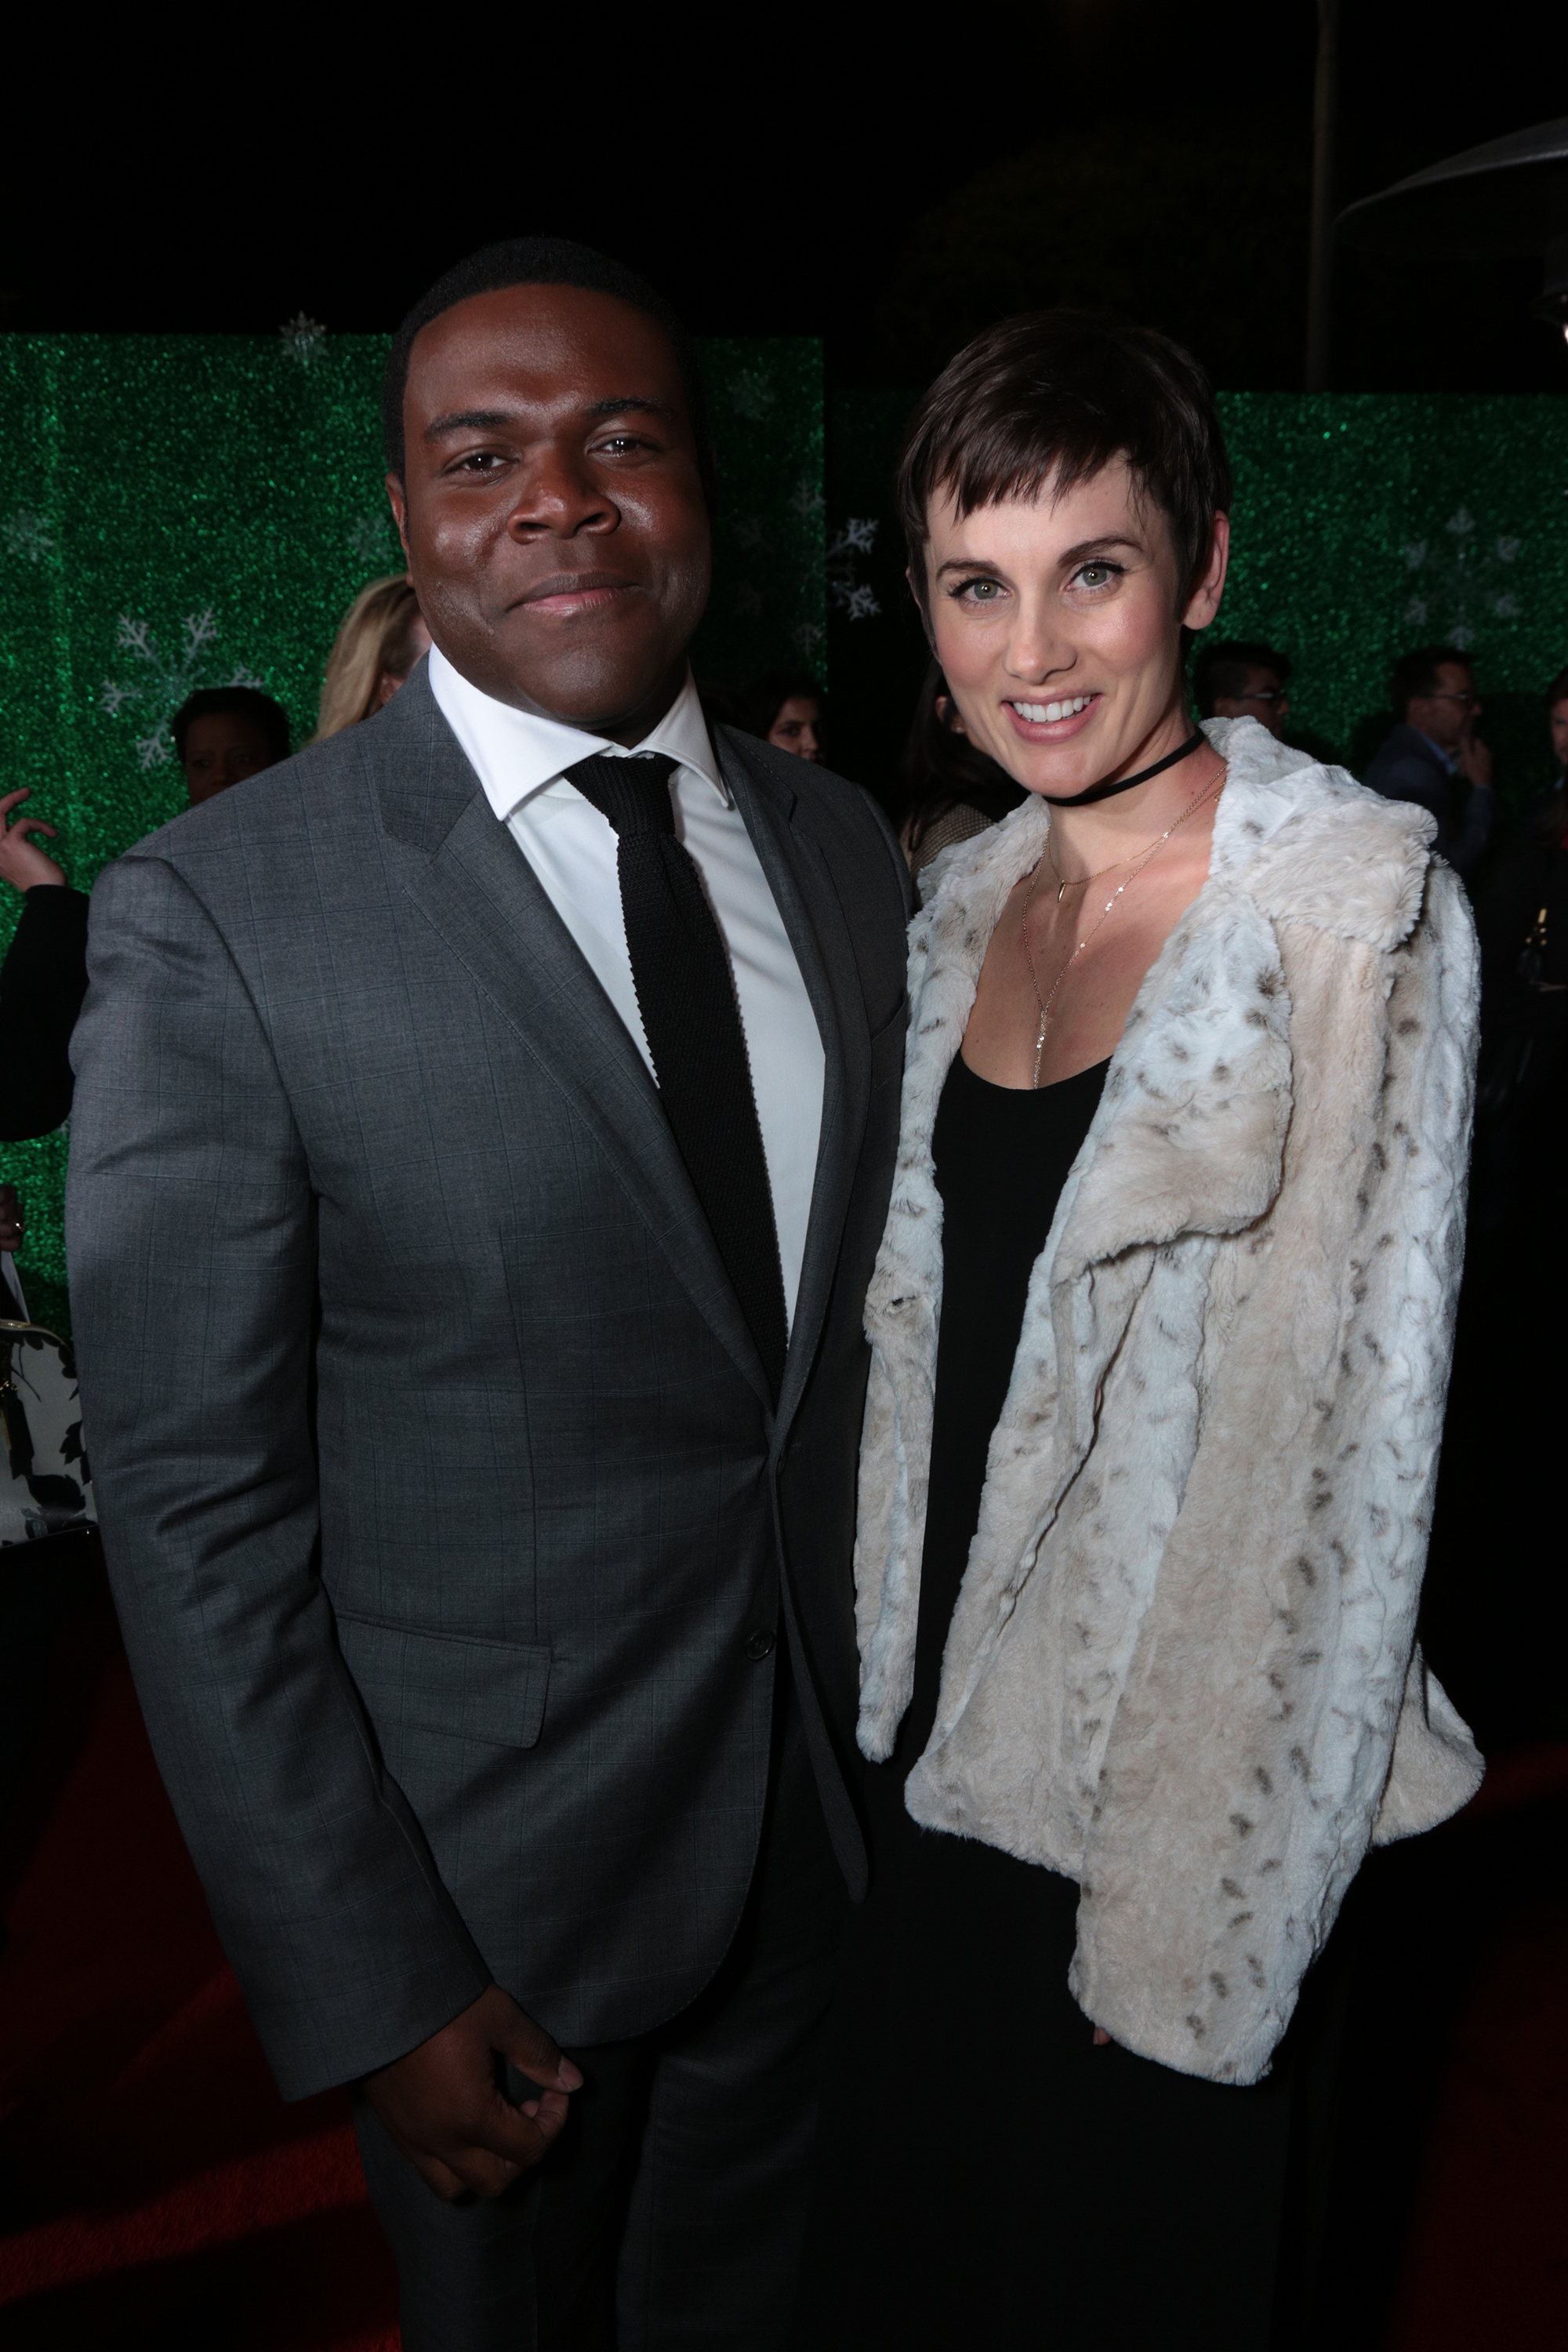 Sam Richardson and guest pose as Paramount Pictures presents the Los Angeles premiere of "Office Christmas Party" at the Regency Village Theater in Los Angeles, CA on Wednesday, December 7, 2016  (Photo: Alex J. Berliner / ABImages)